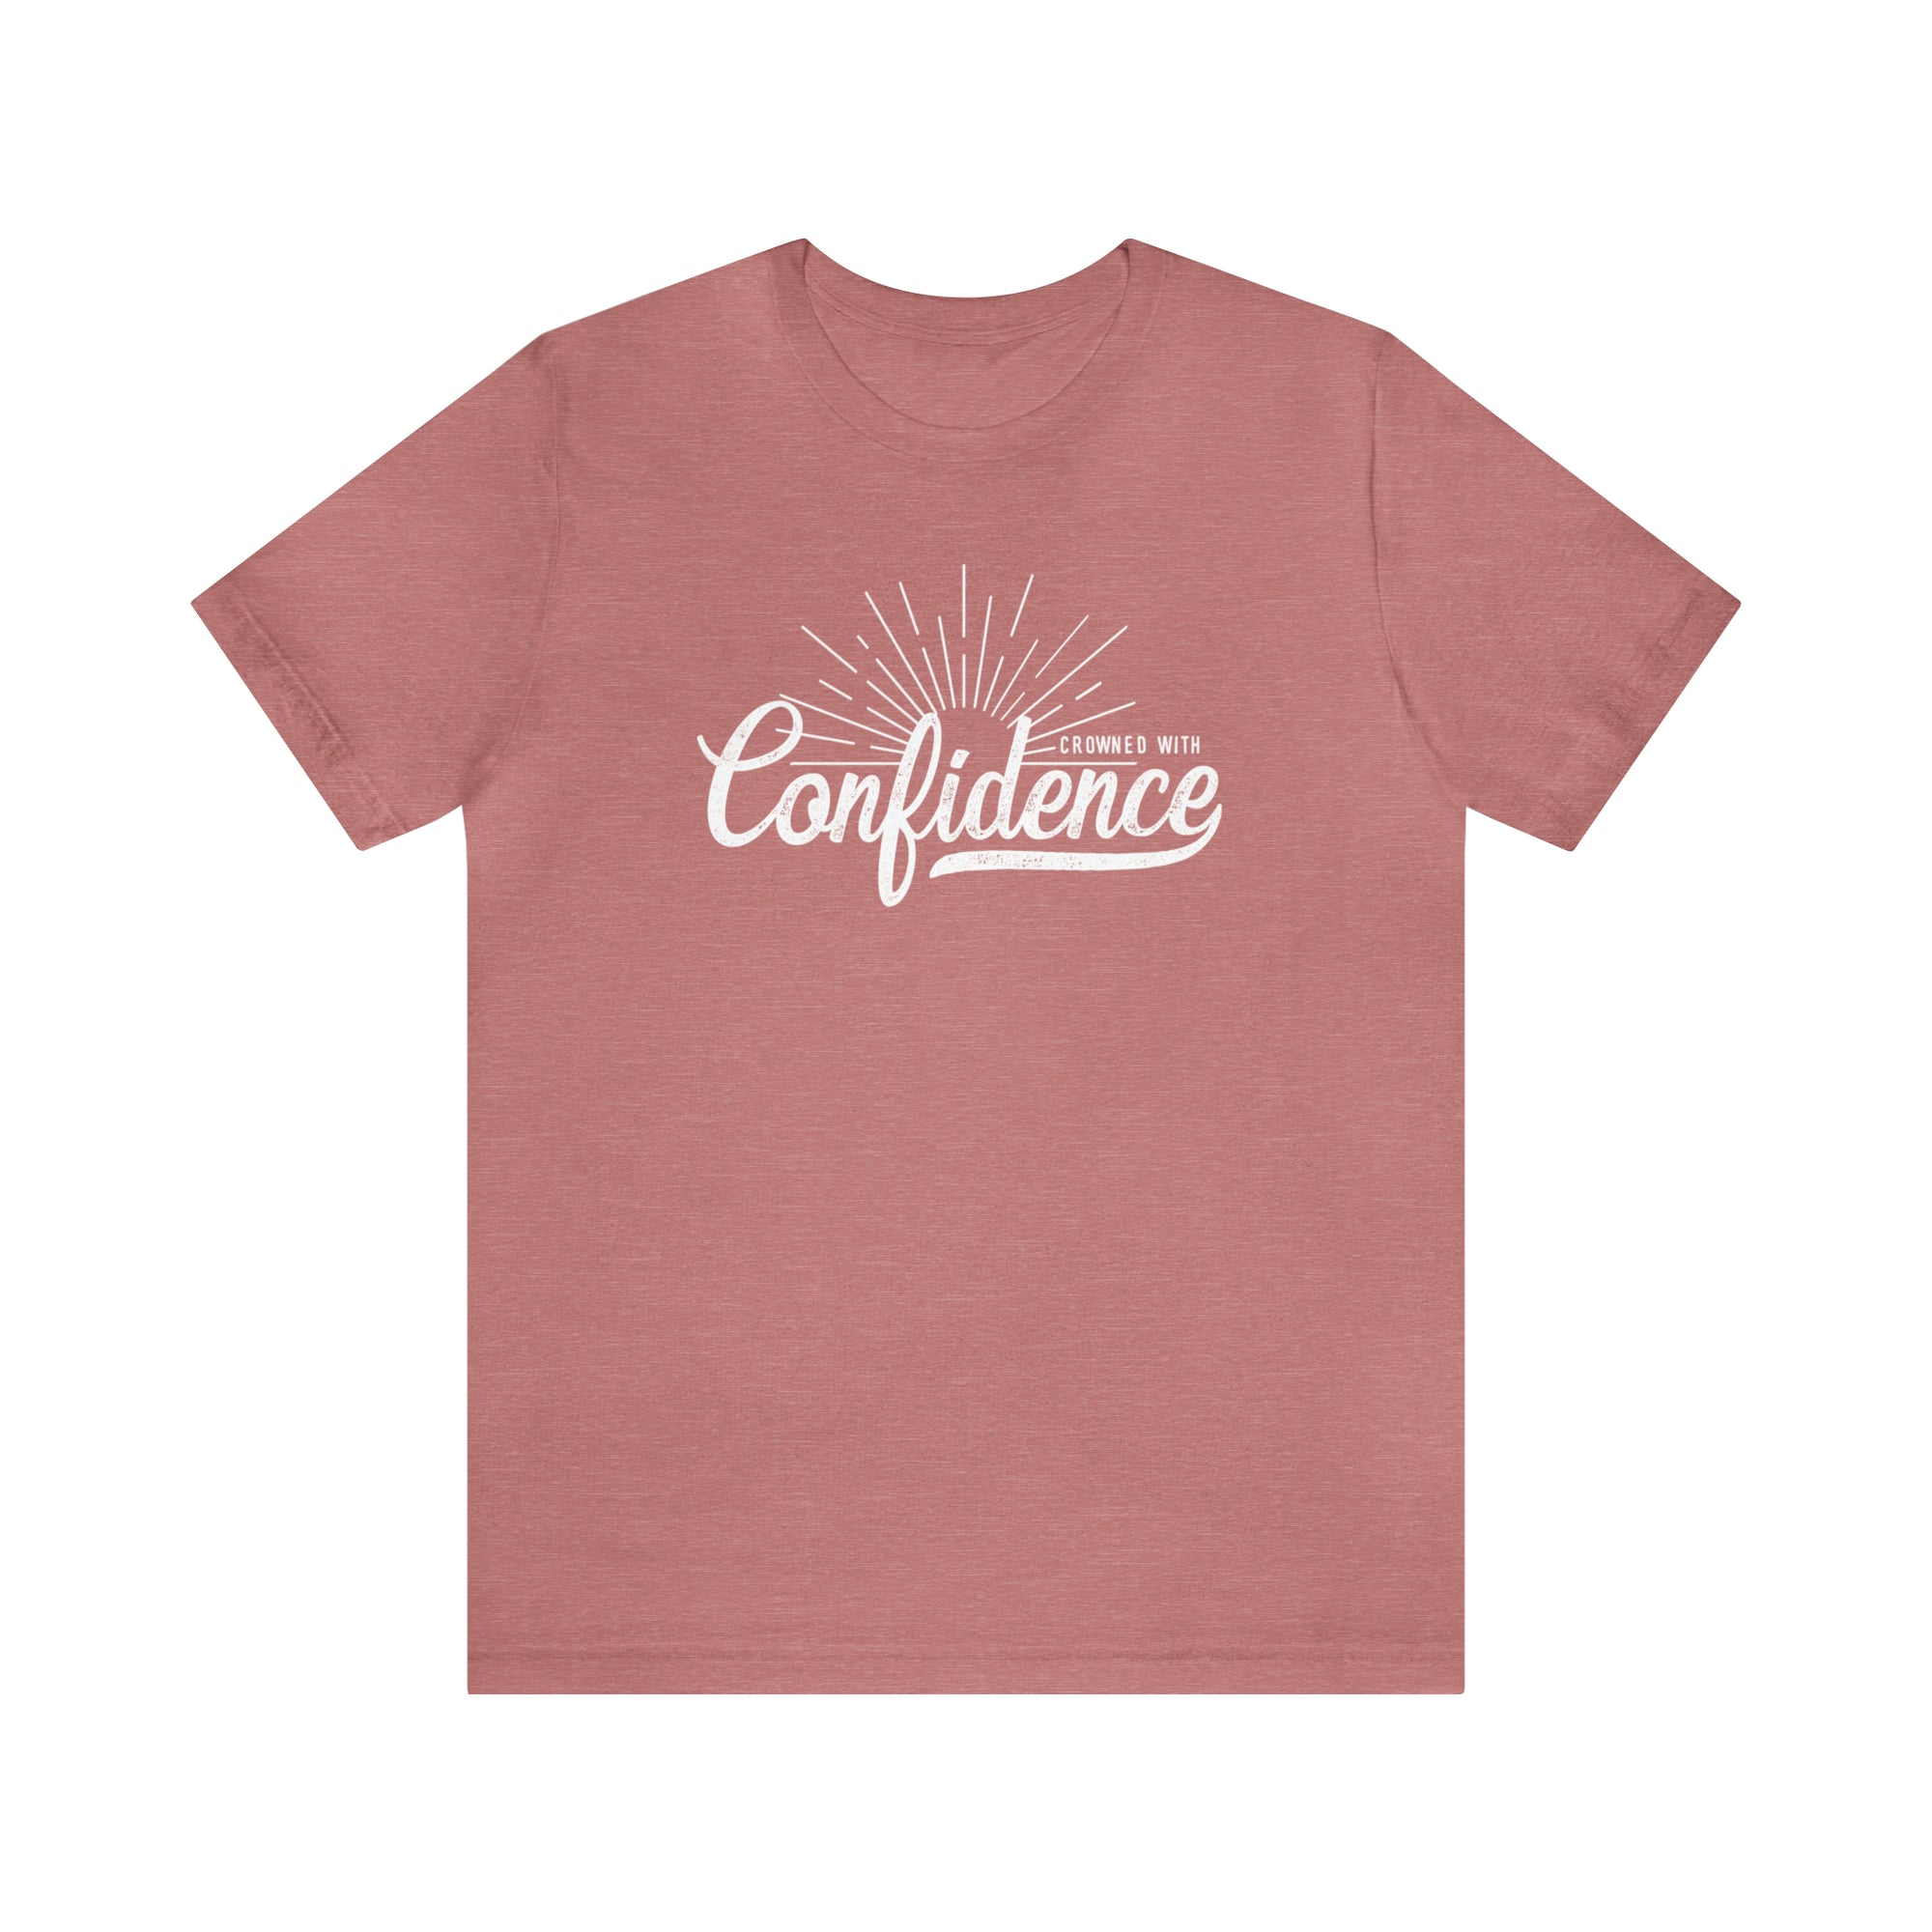 Crowned With Confidence Tee